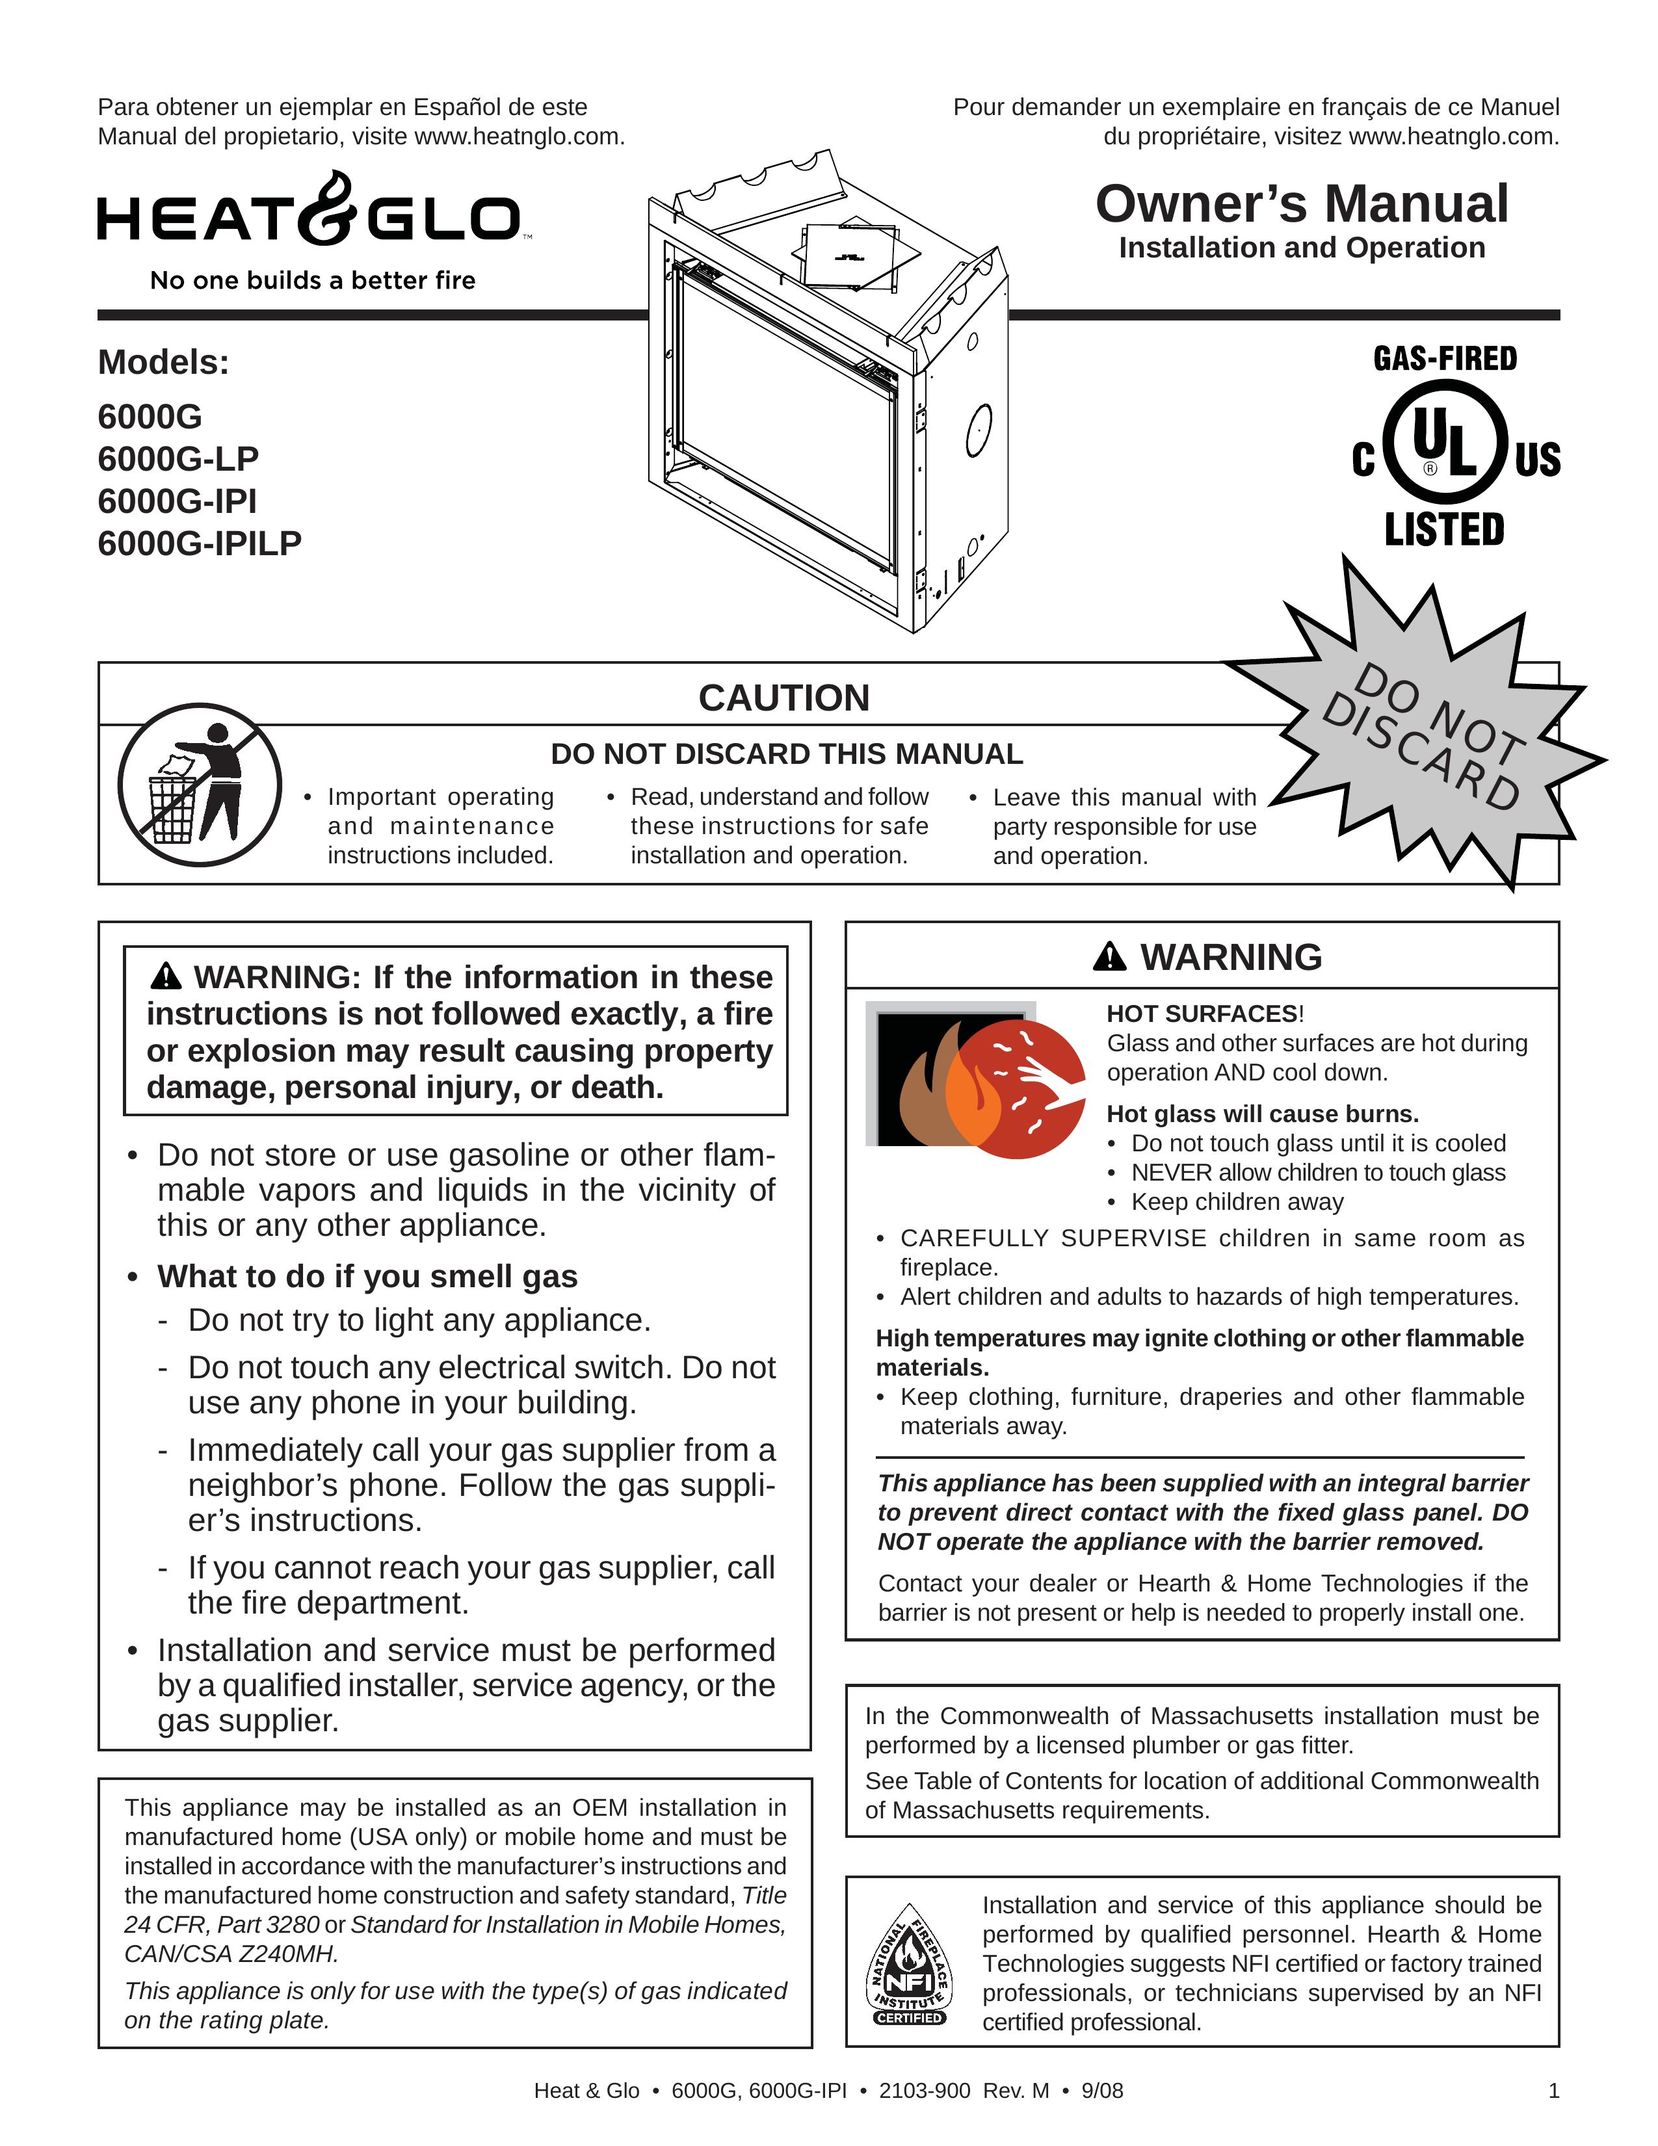 Heat & Glo LifeStyle 6000G-LP Air Conditioner User Manual